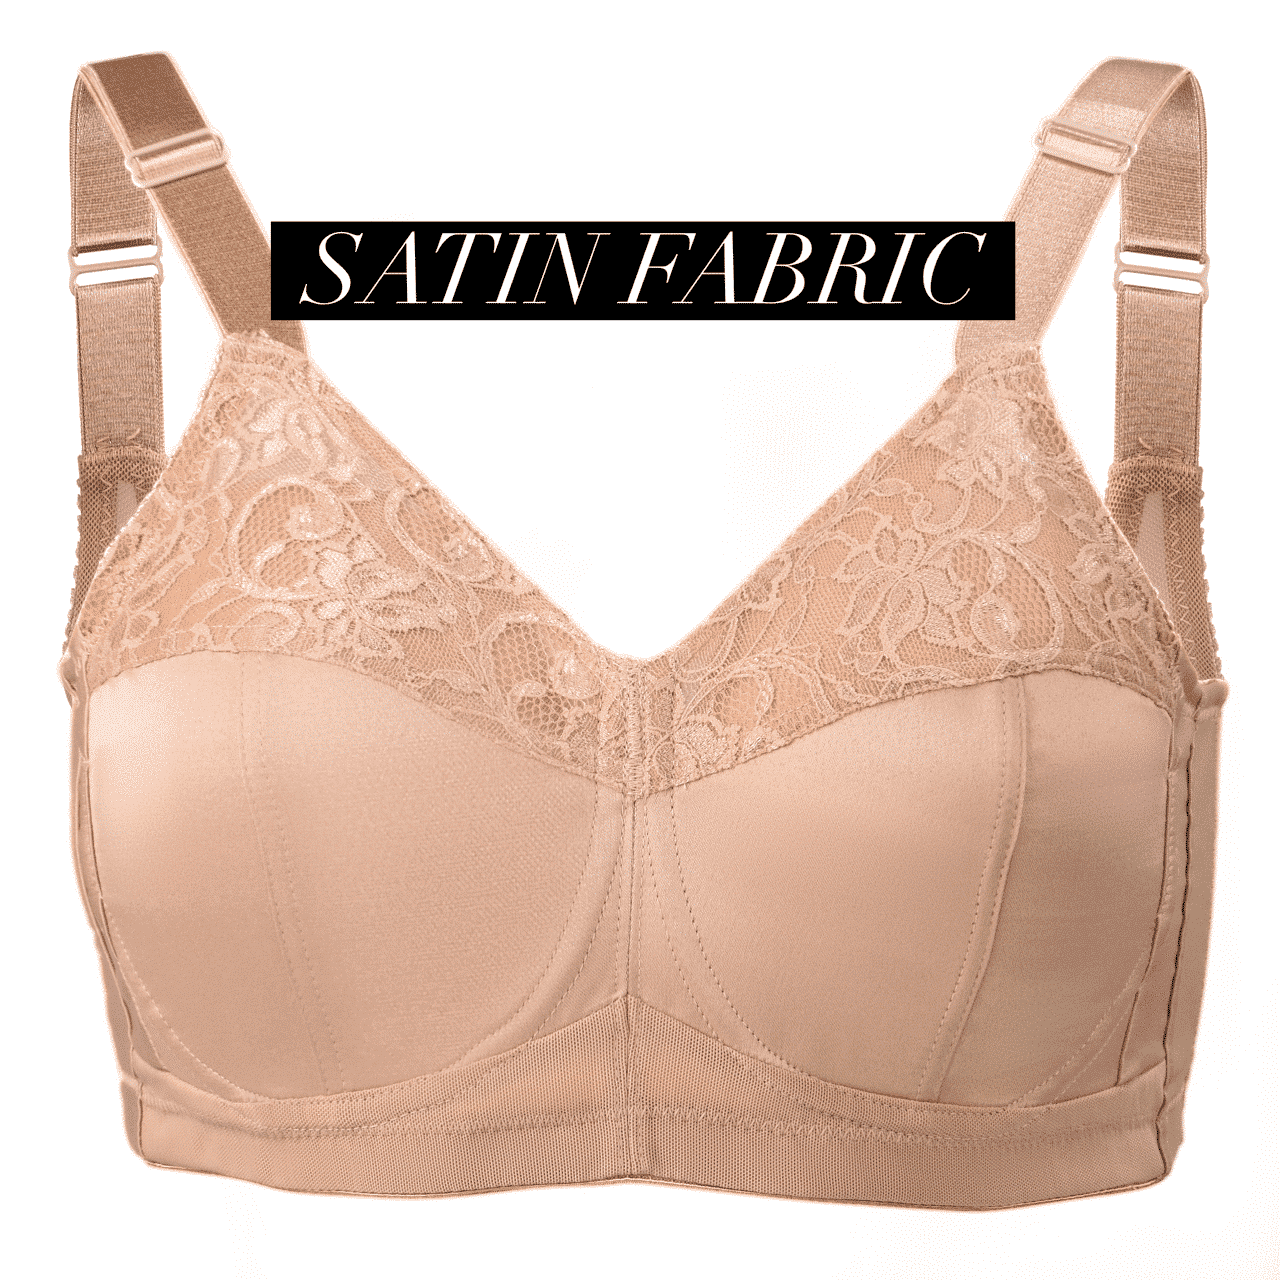 Bali Lace and Smooth Underwire Bra (3432) Nude, 34DD at  Women's  Clothing store